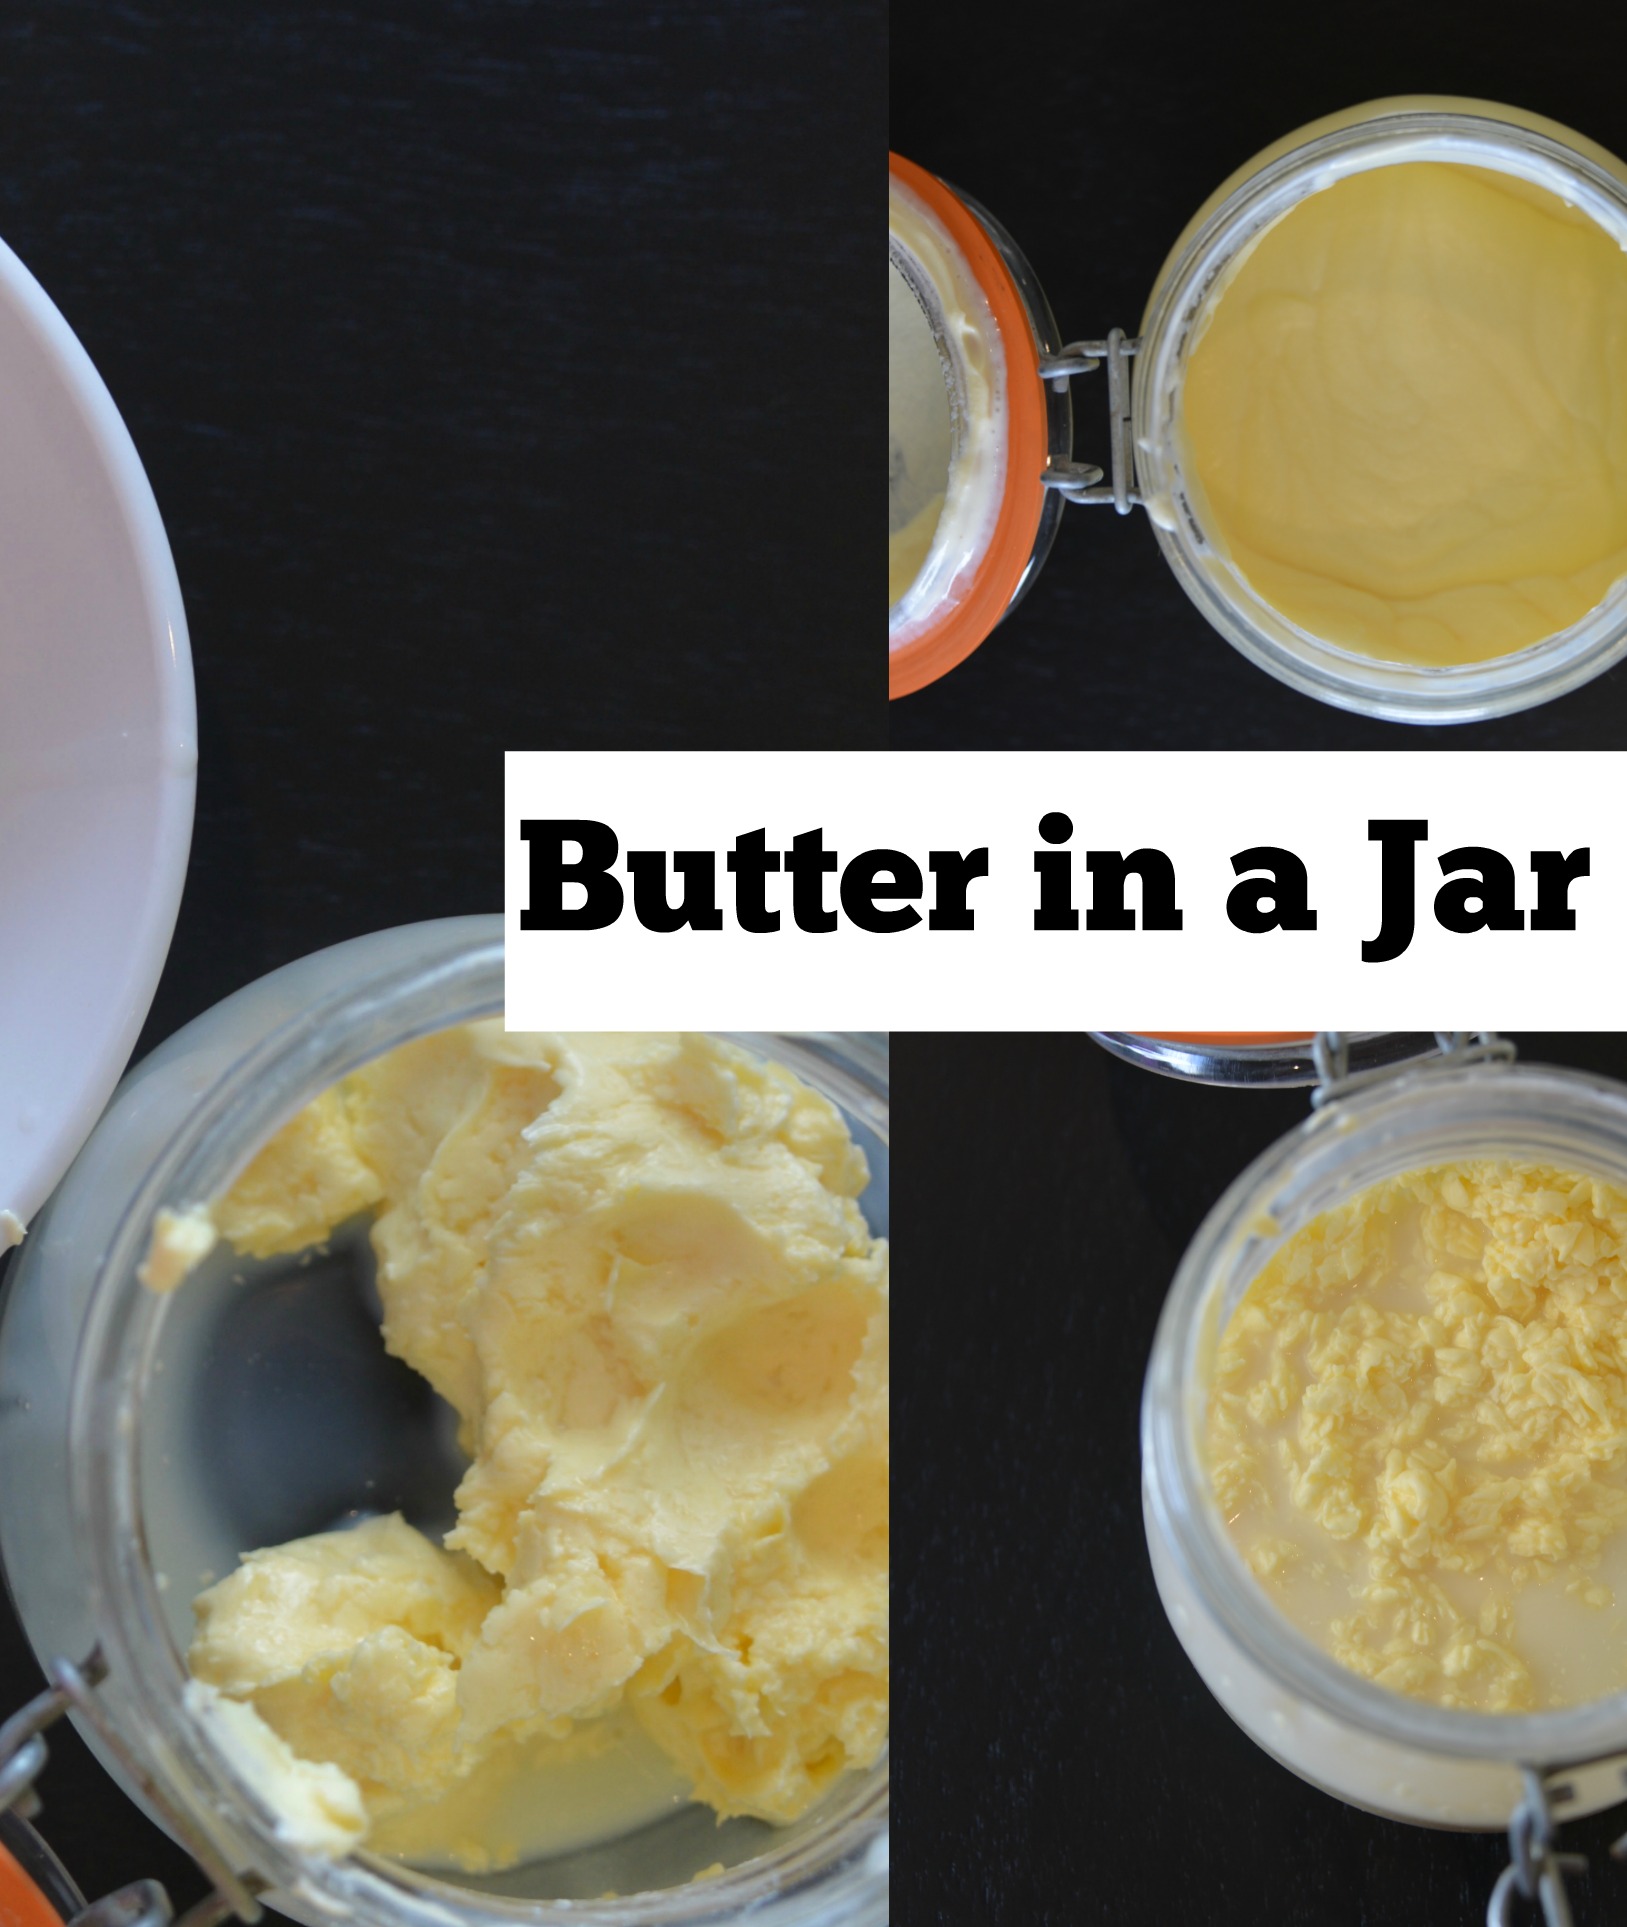 Kitchen Science - How to Make Butter at Home - Science Sparks